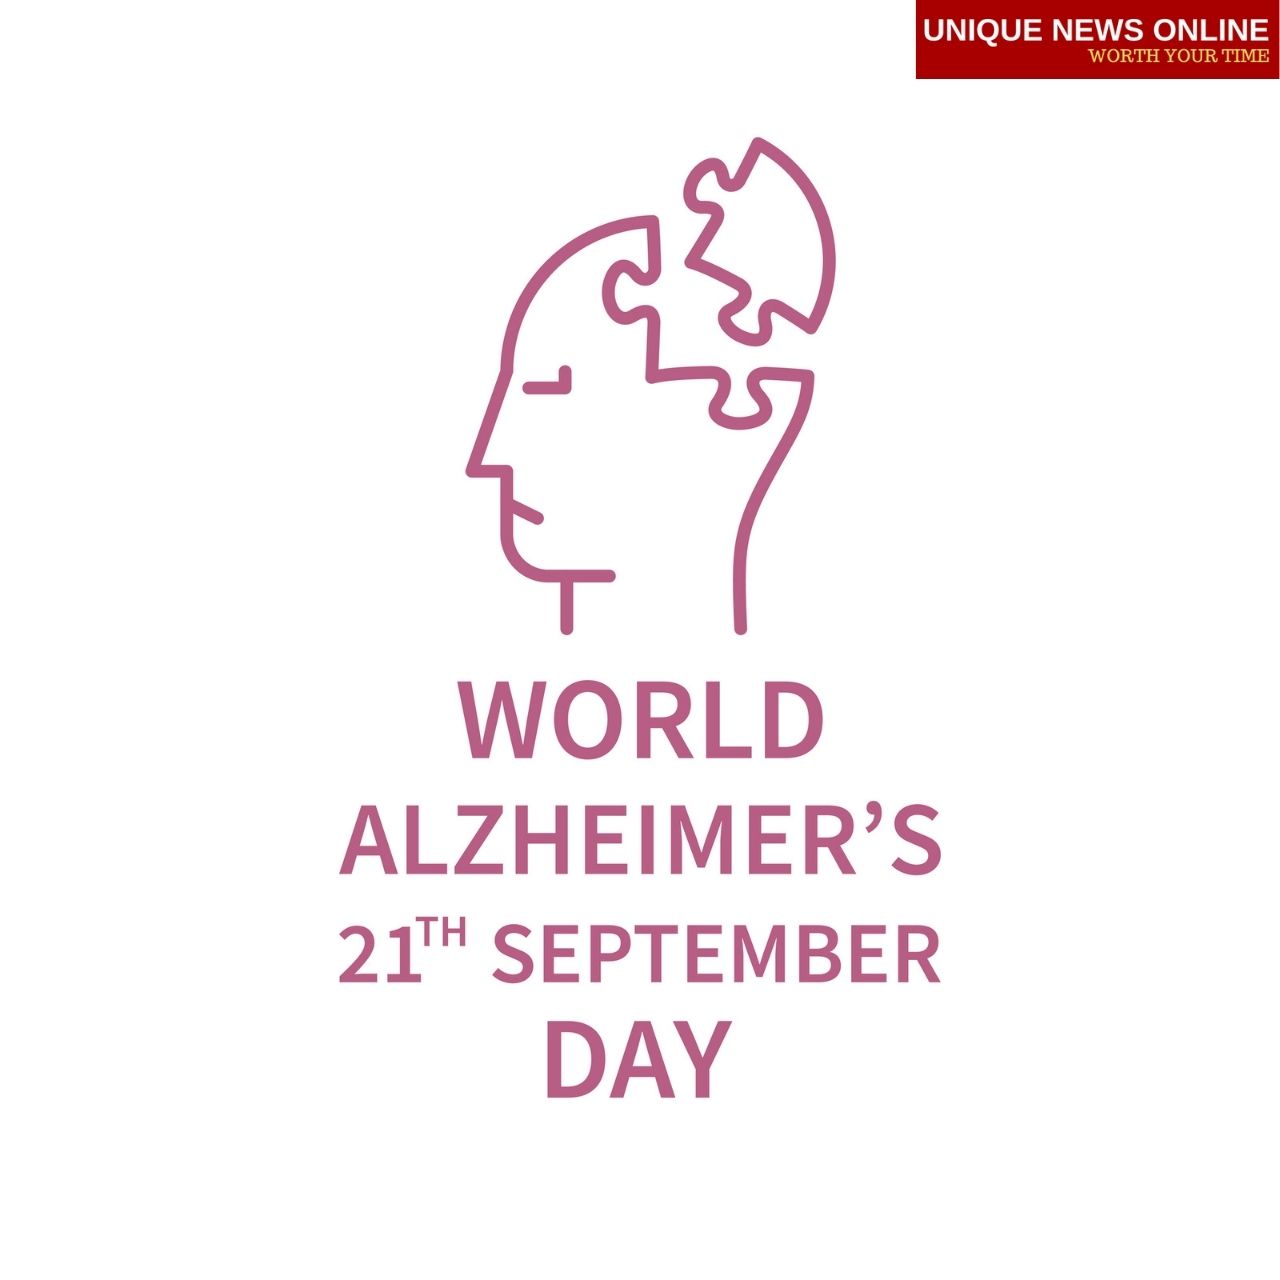 World Alzheimer's Day 2021 Poster, Quotes, Images, and Messages to create awareness